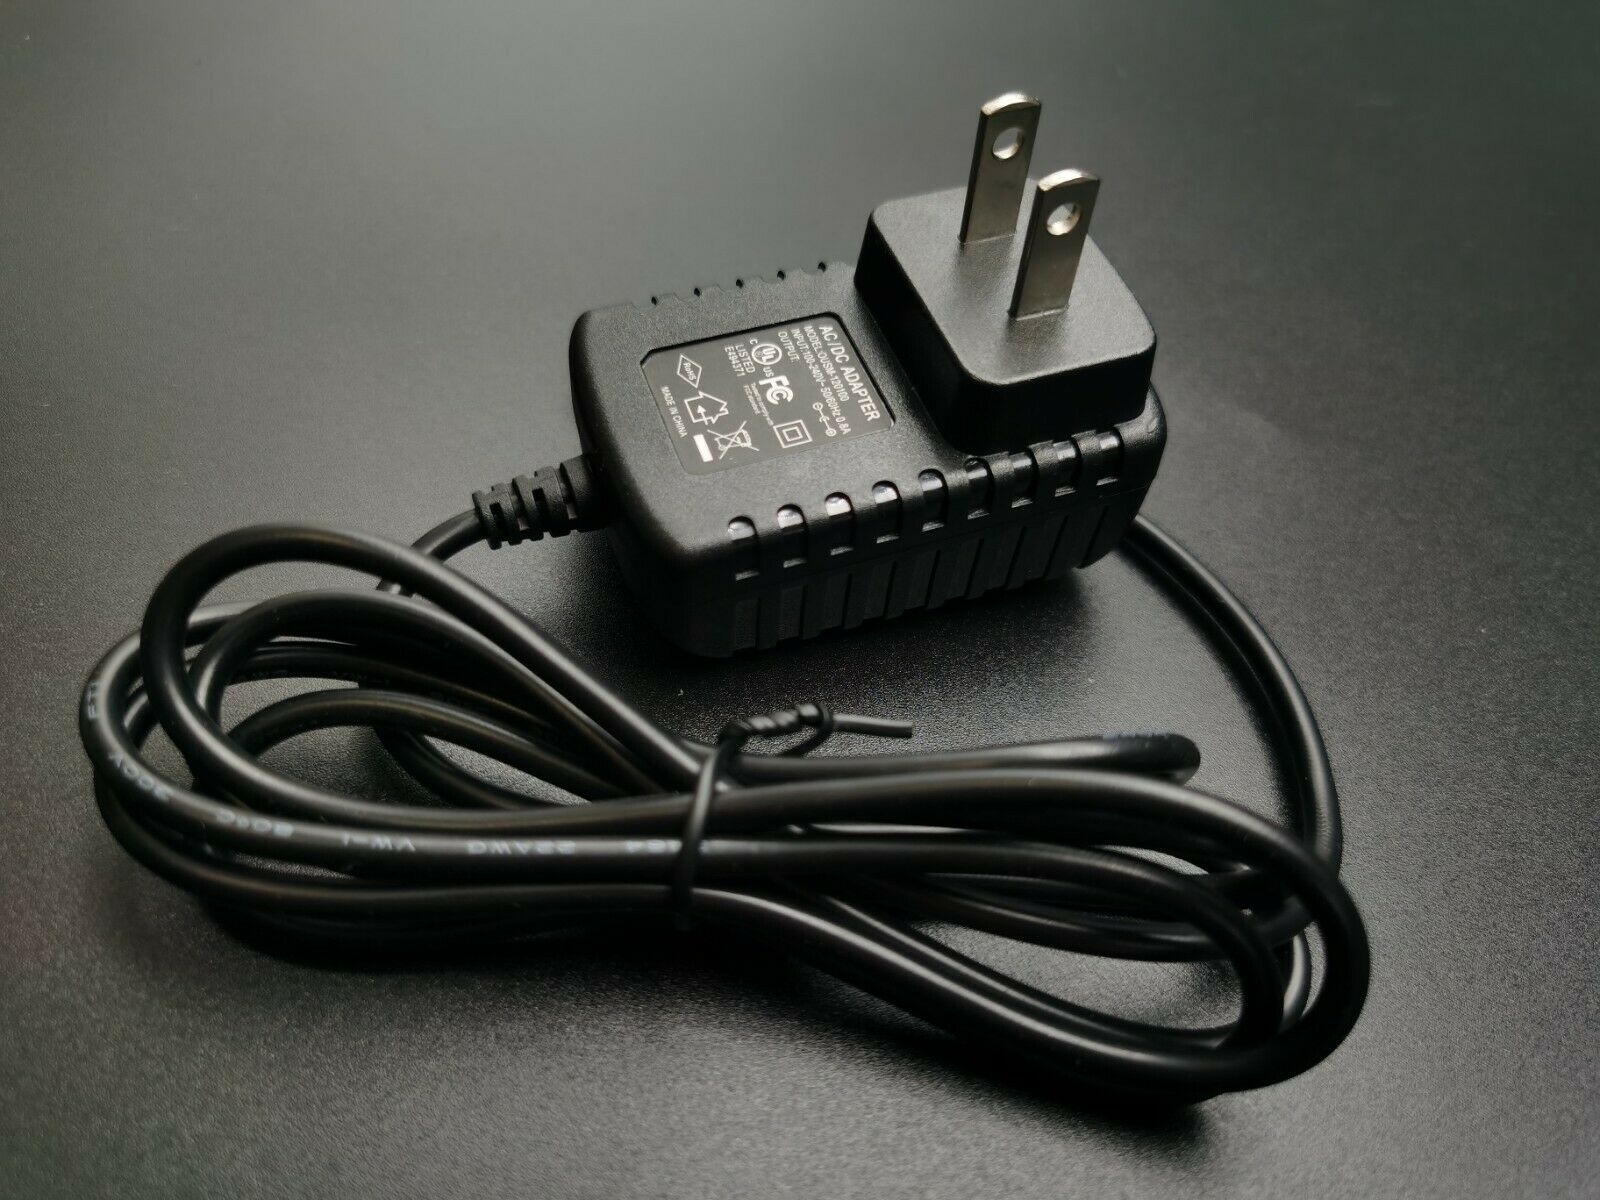 AC/DC Adapter For Surefire R1 UNR-A-BK Lawman Rechargeable LED Flashlight Power Specification: 100% Brand New AC Adapt